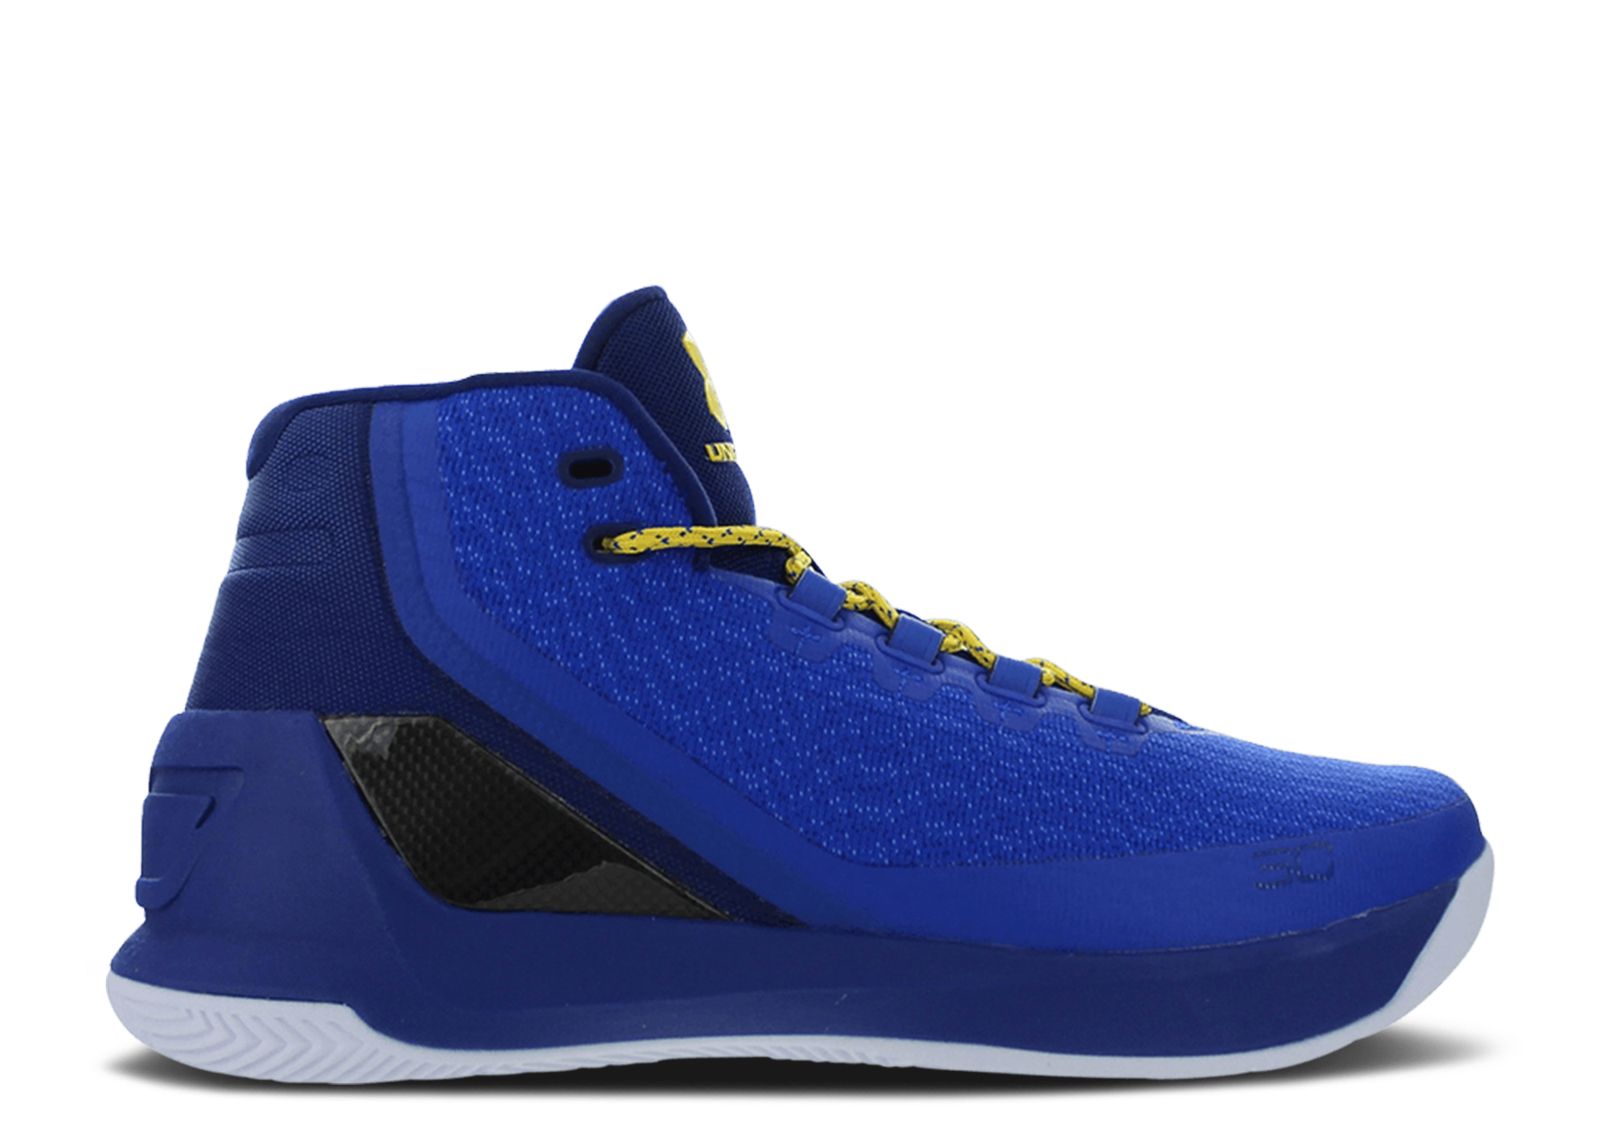 Curry 3 'Dub Nation' - Under Armour - 1269279 400 - try/csp/txi ...